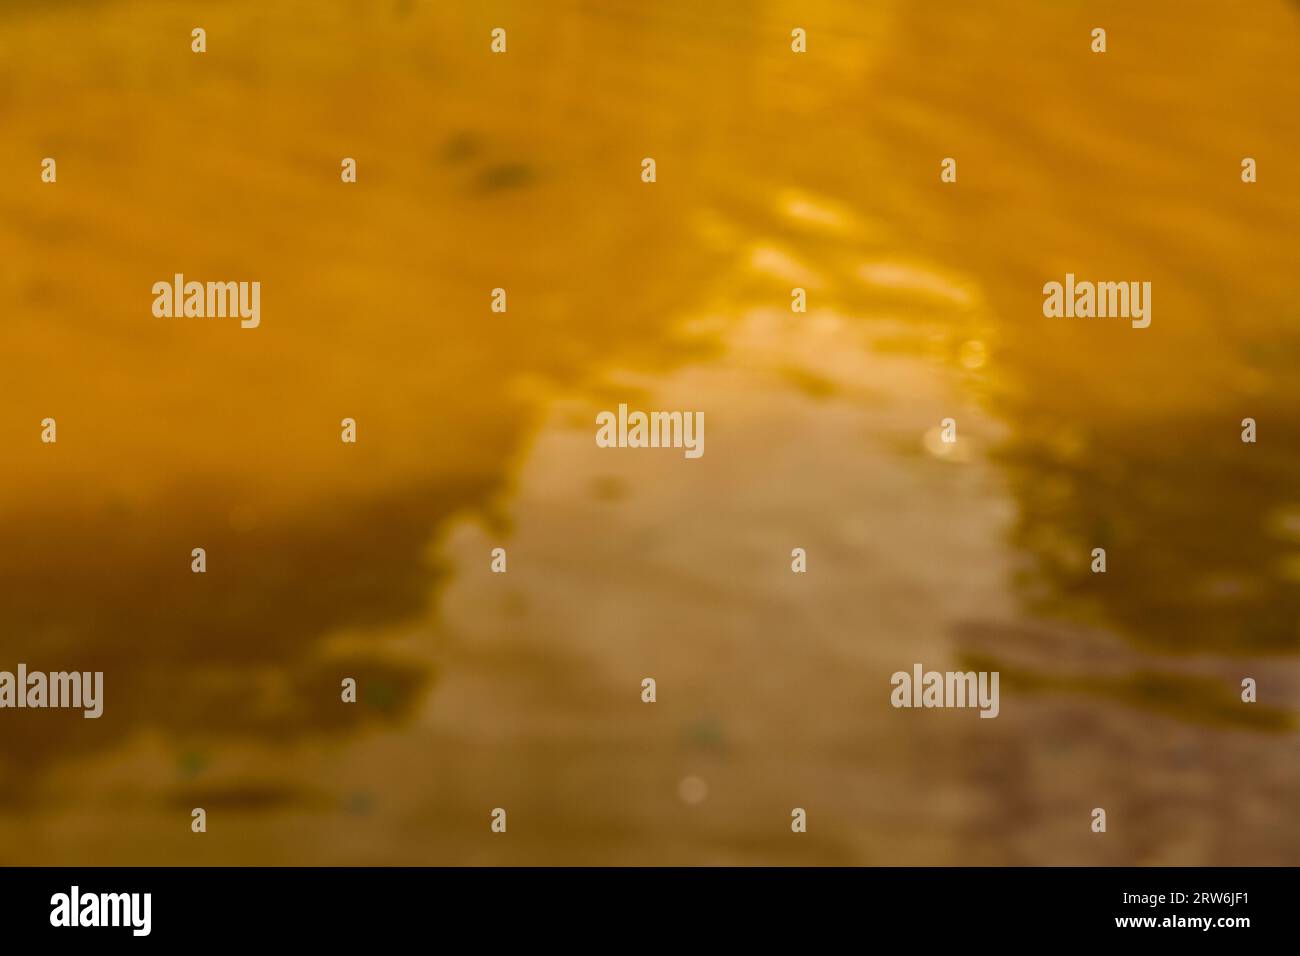 Blurred defocussed view of ripples on orange yellow water. Stock Photo